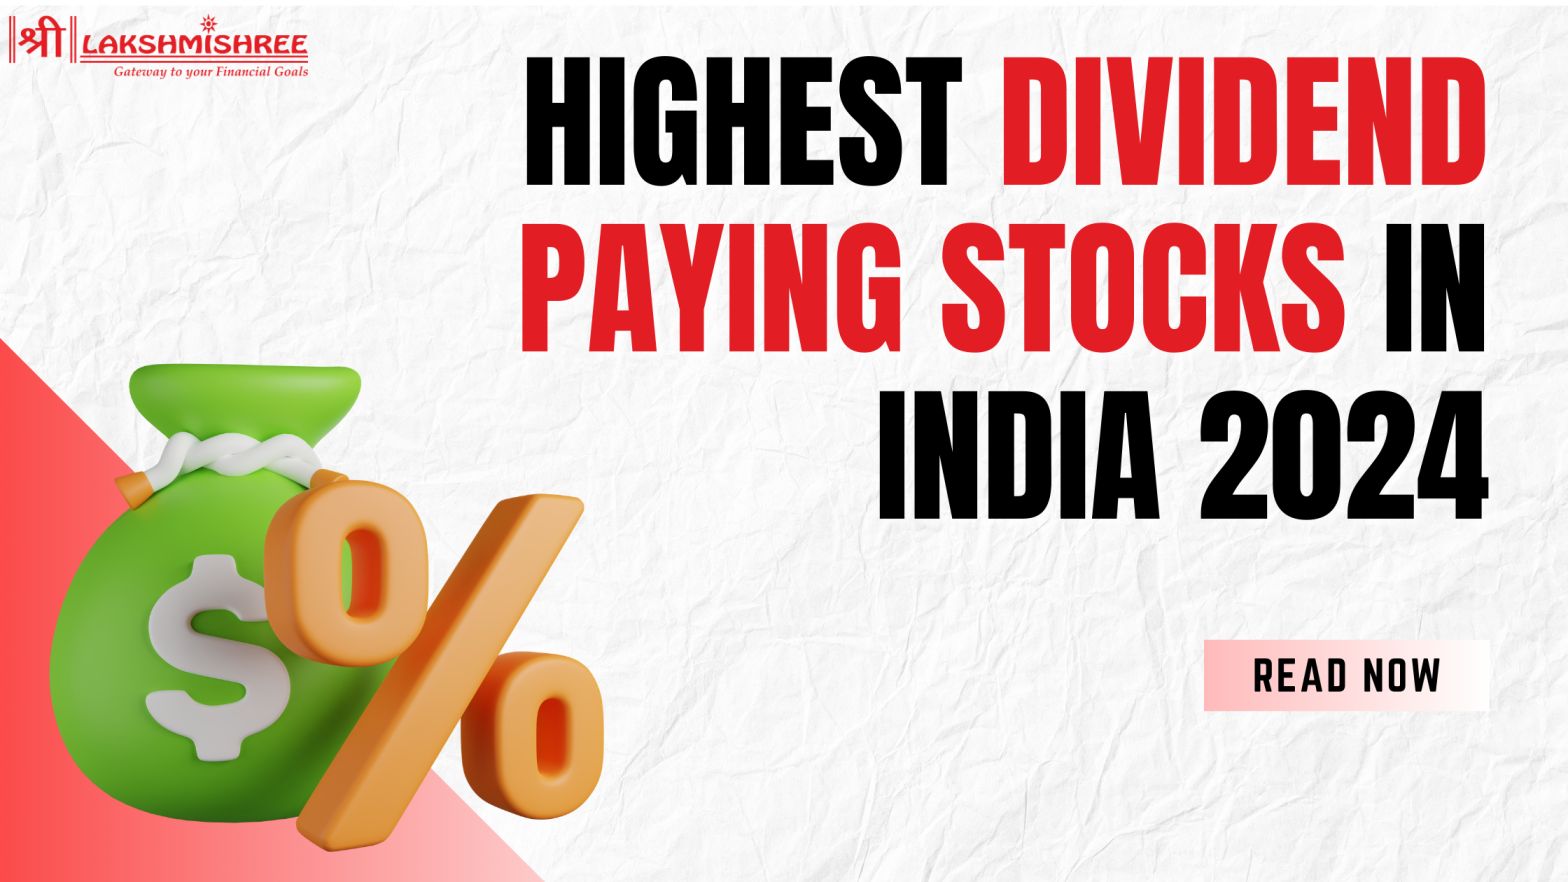 10 Highest Dividend Paying Stocks In India 2024